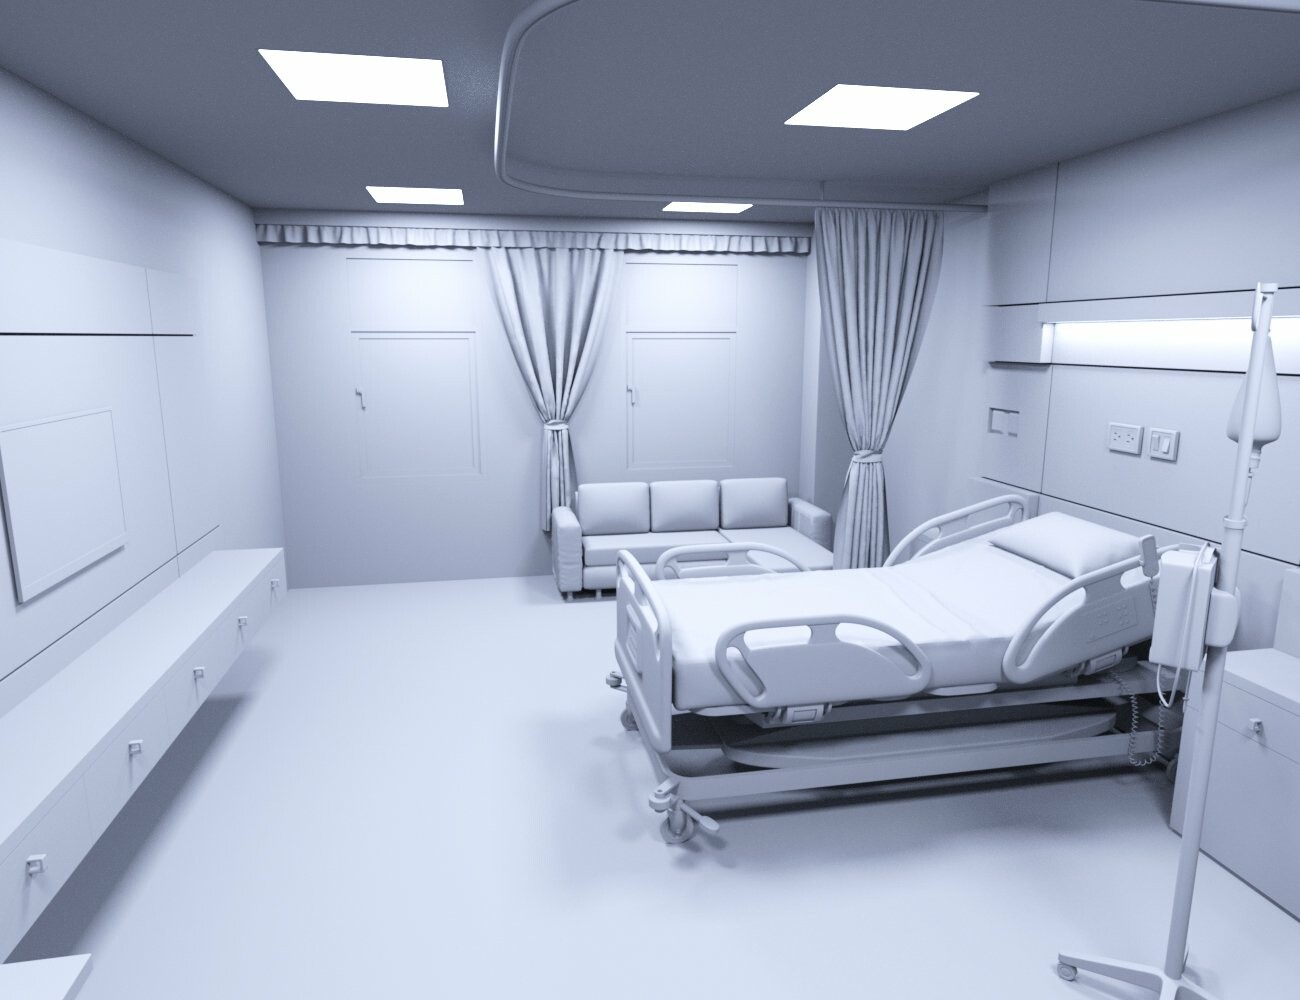 The Modern Hospital Room includes a full room, bed and several props. 